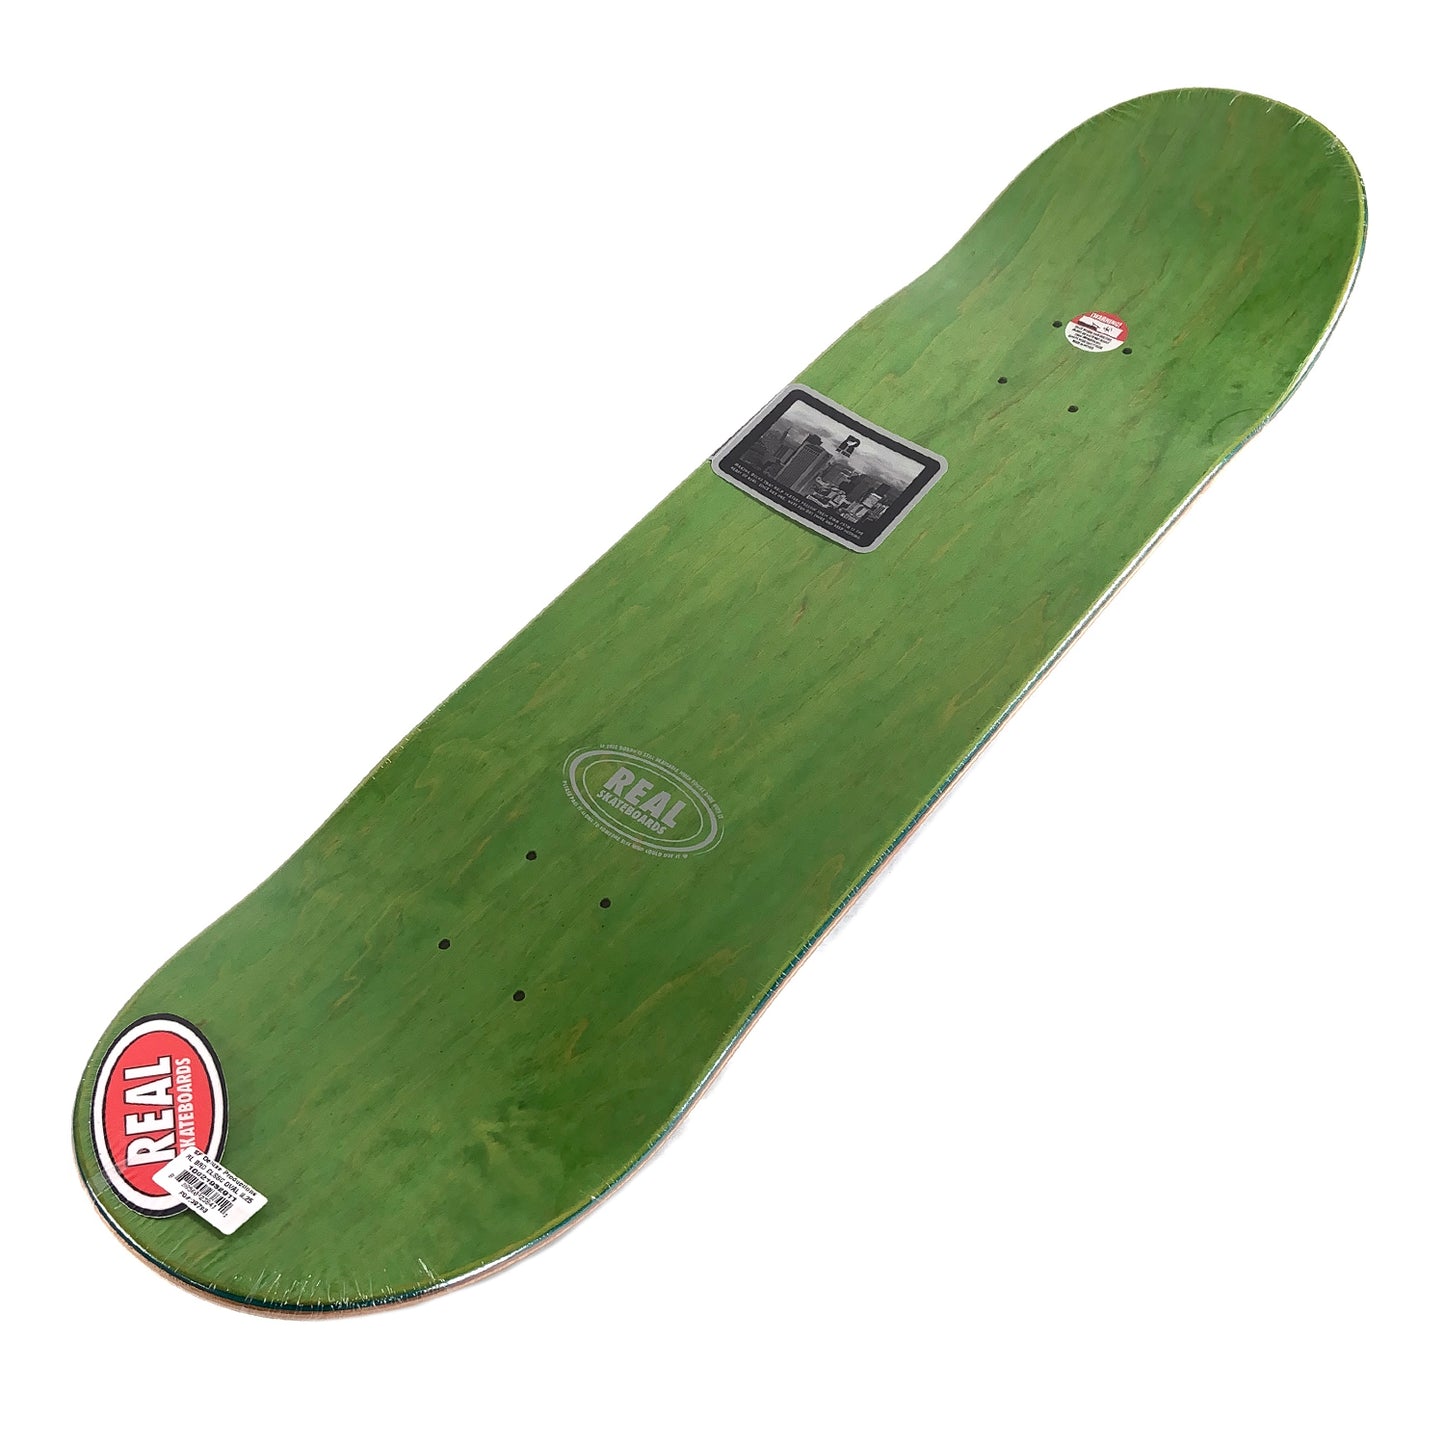 Real - 8.5" - Team Classic Oval Deck - Black - Prime Delux Store